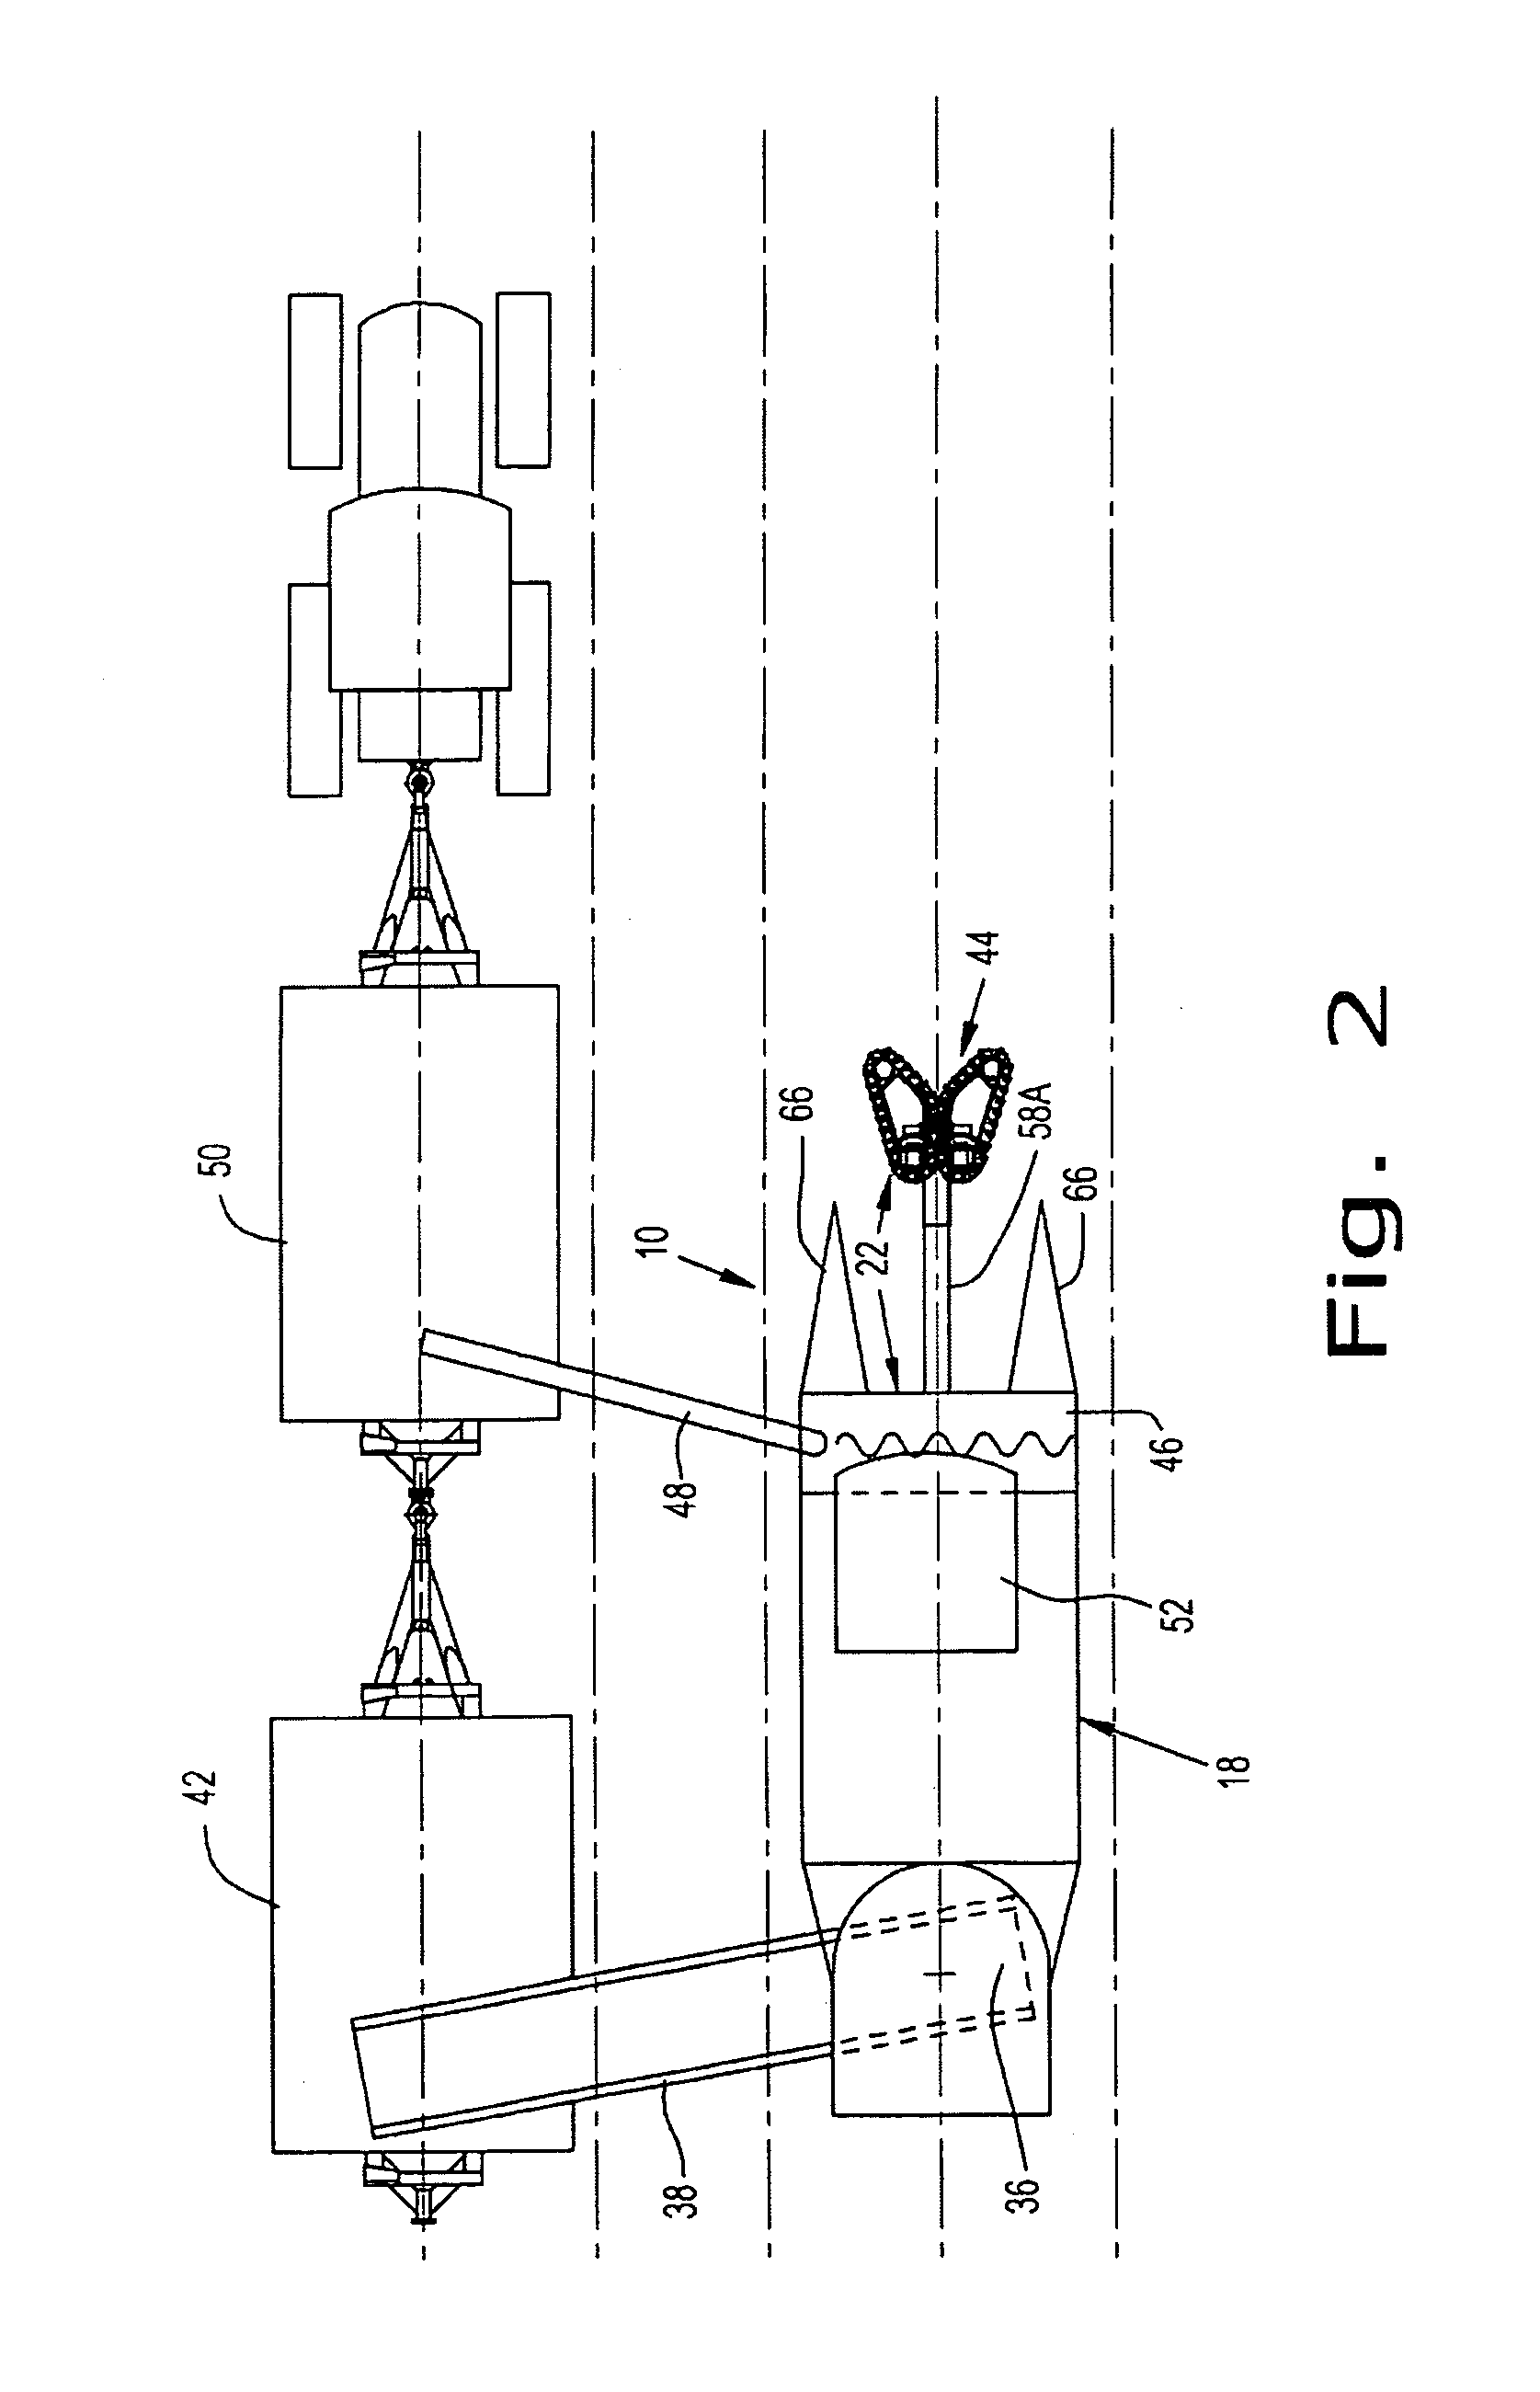 Agricultural harvester with simultaneous and independent seed and biomass processing